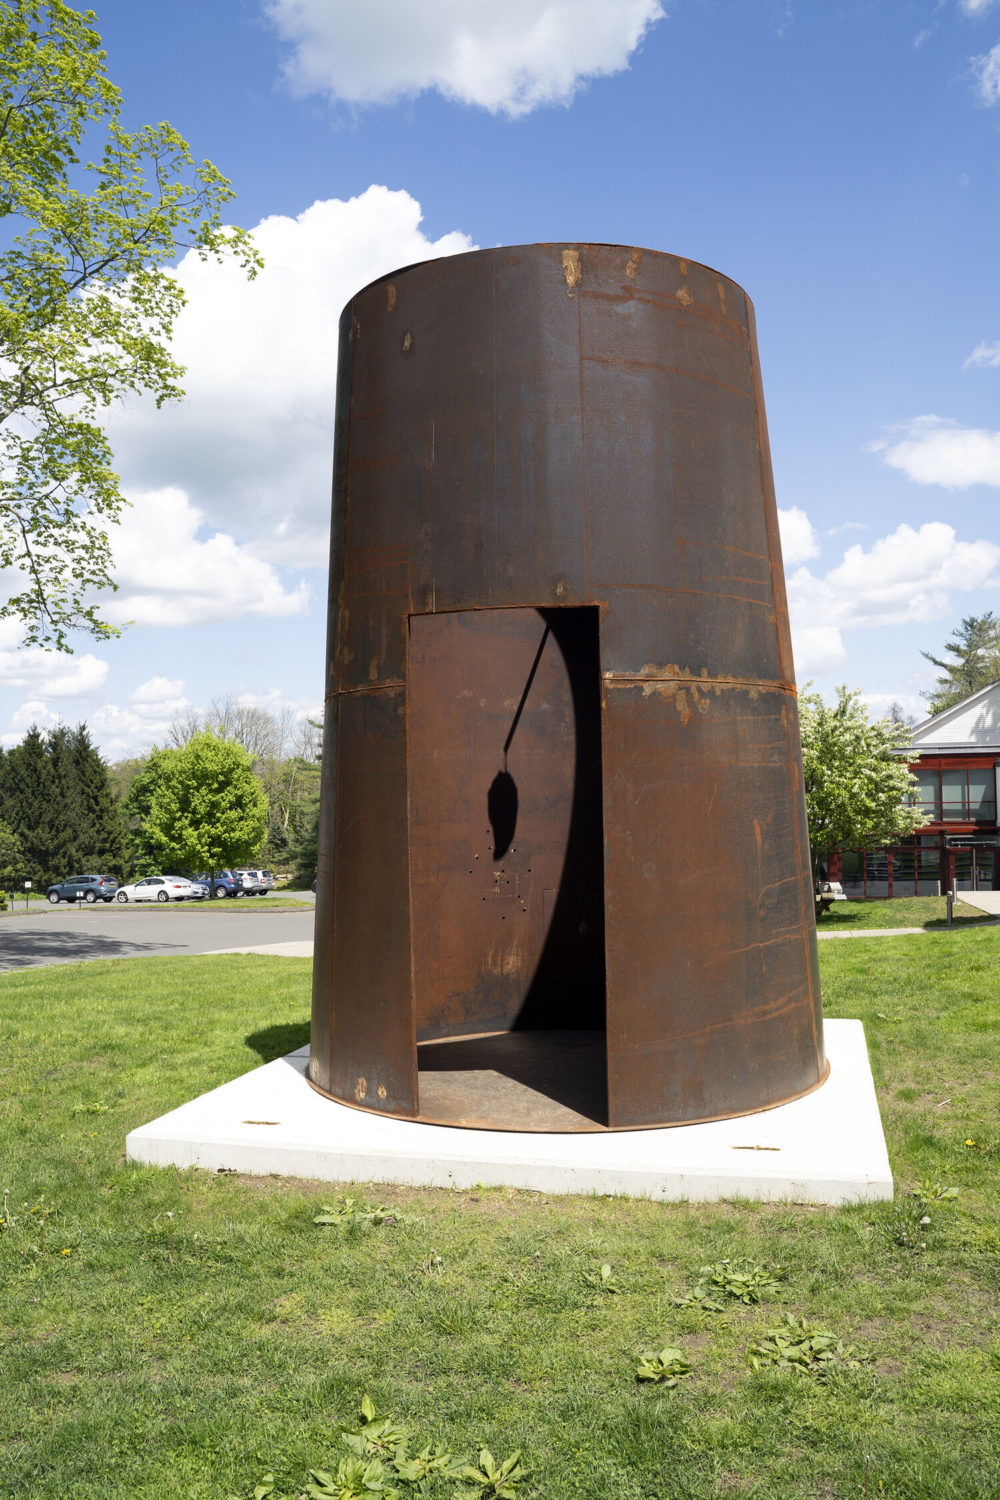 Steel chamber sculpture sits on green lawn